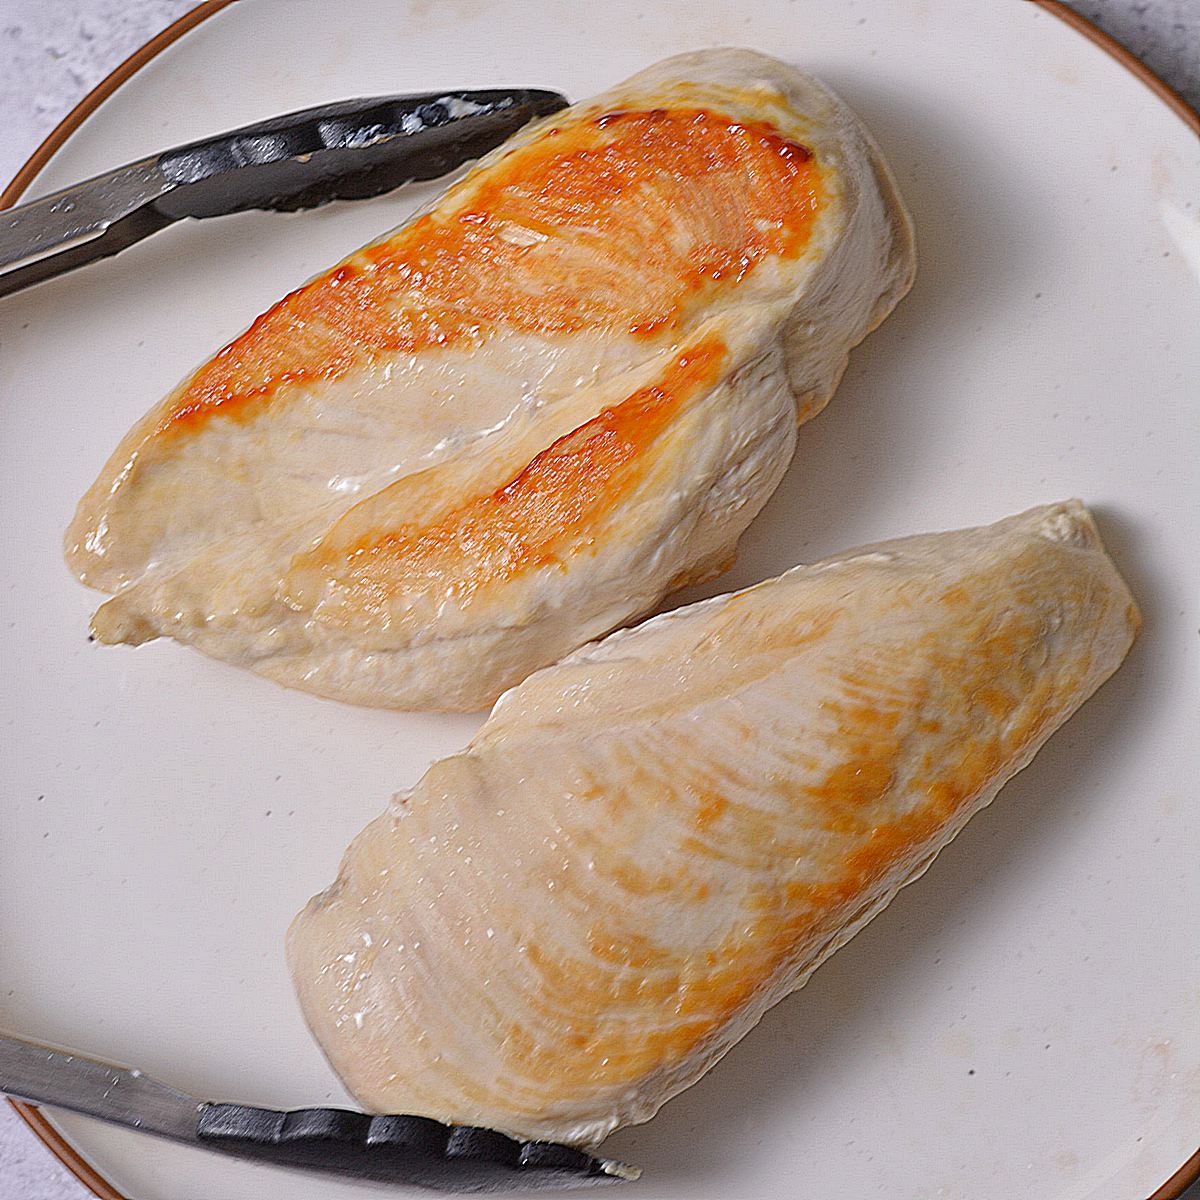 Cooked chicken breasts on a white plate.